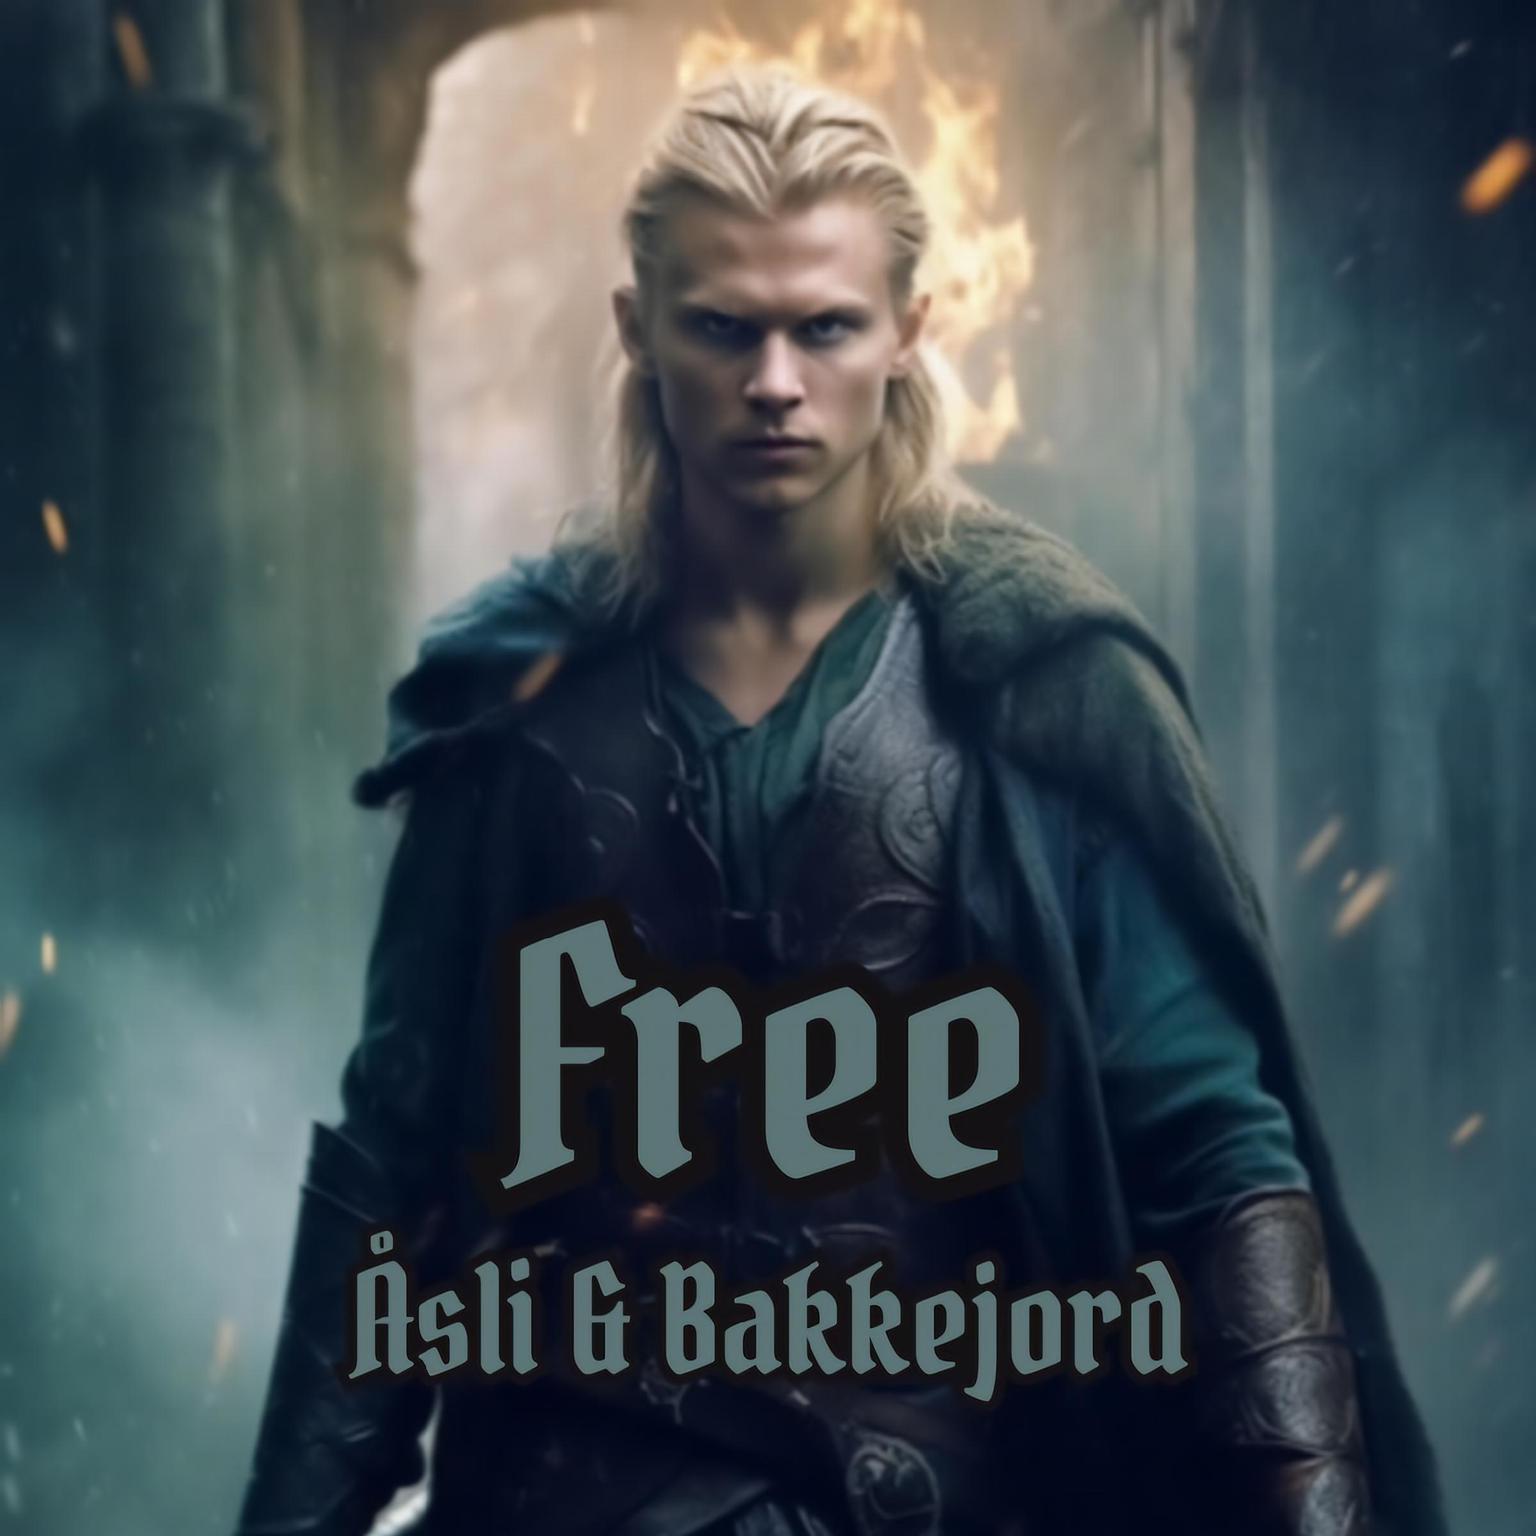 Free (The Viking Ventures Trilogy - Book 3) Audiobook, by Ole Åsli